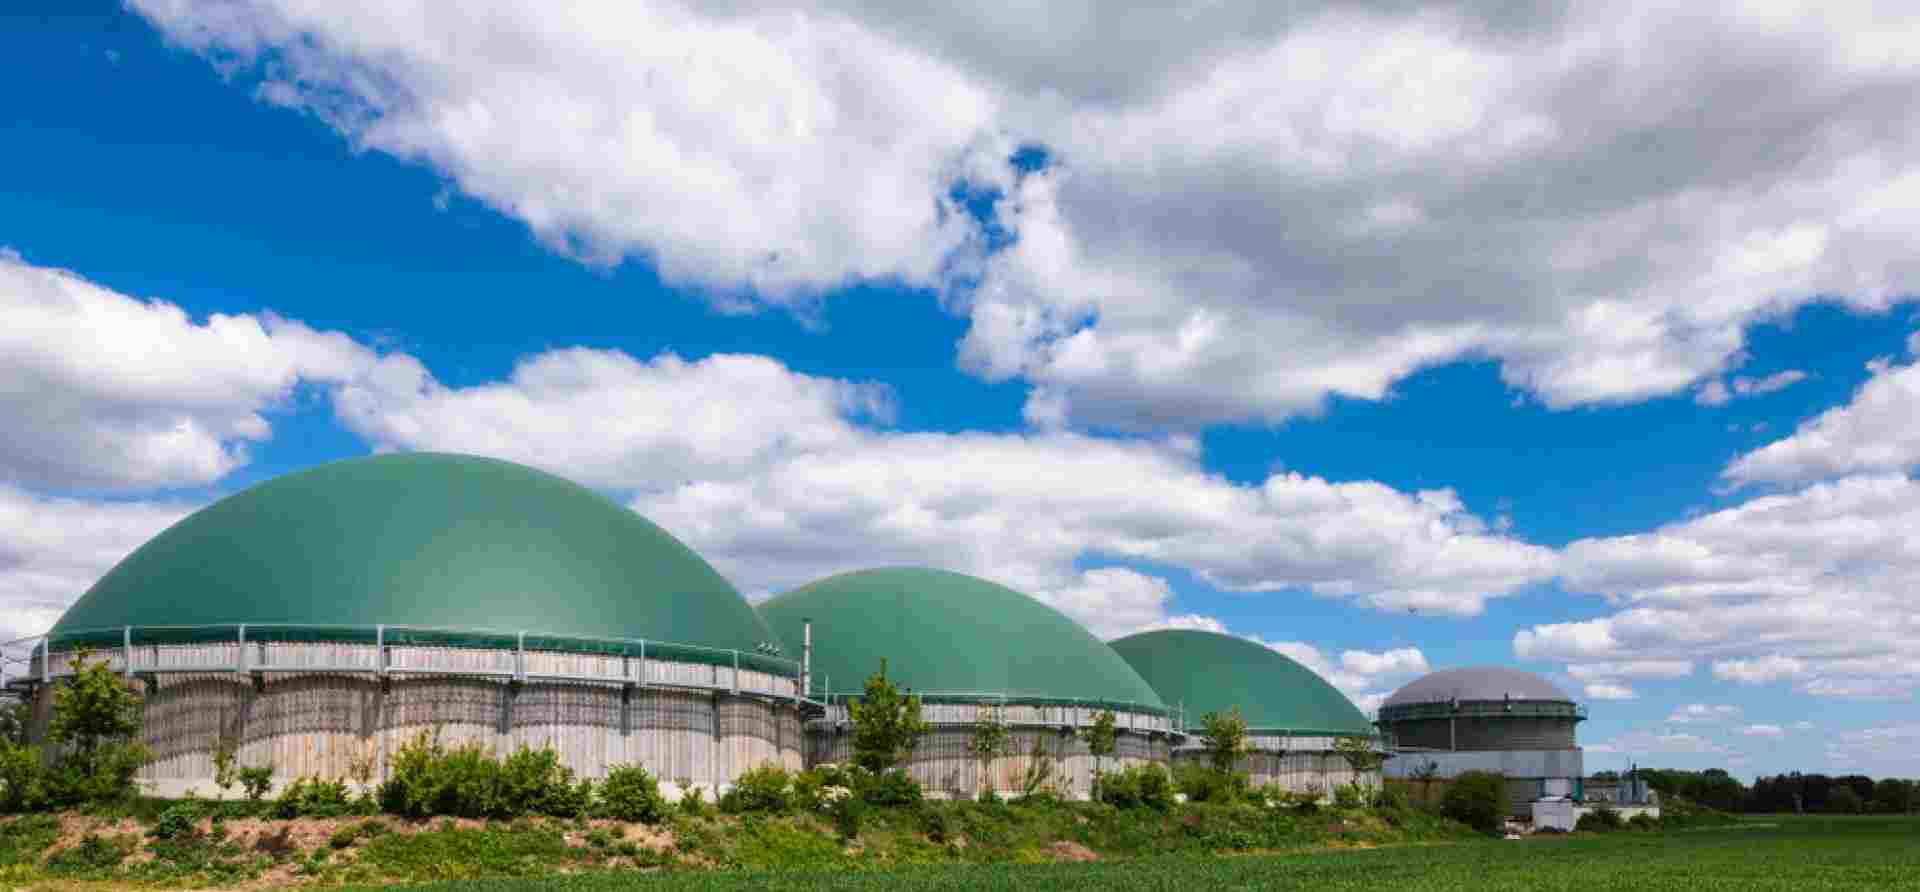 GAIL India’s Jhiri compressed biogas (CBG) plant will be ready this month; fully functional in March